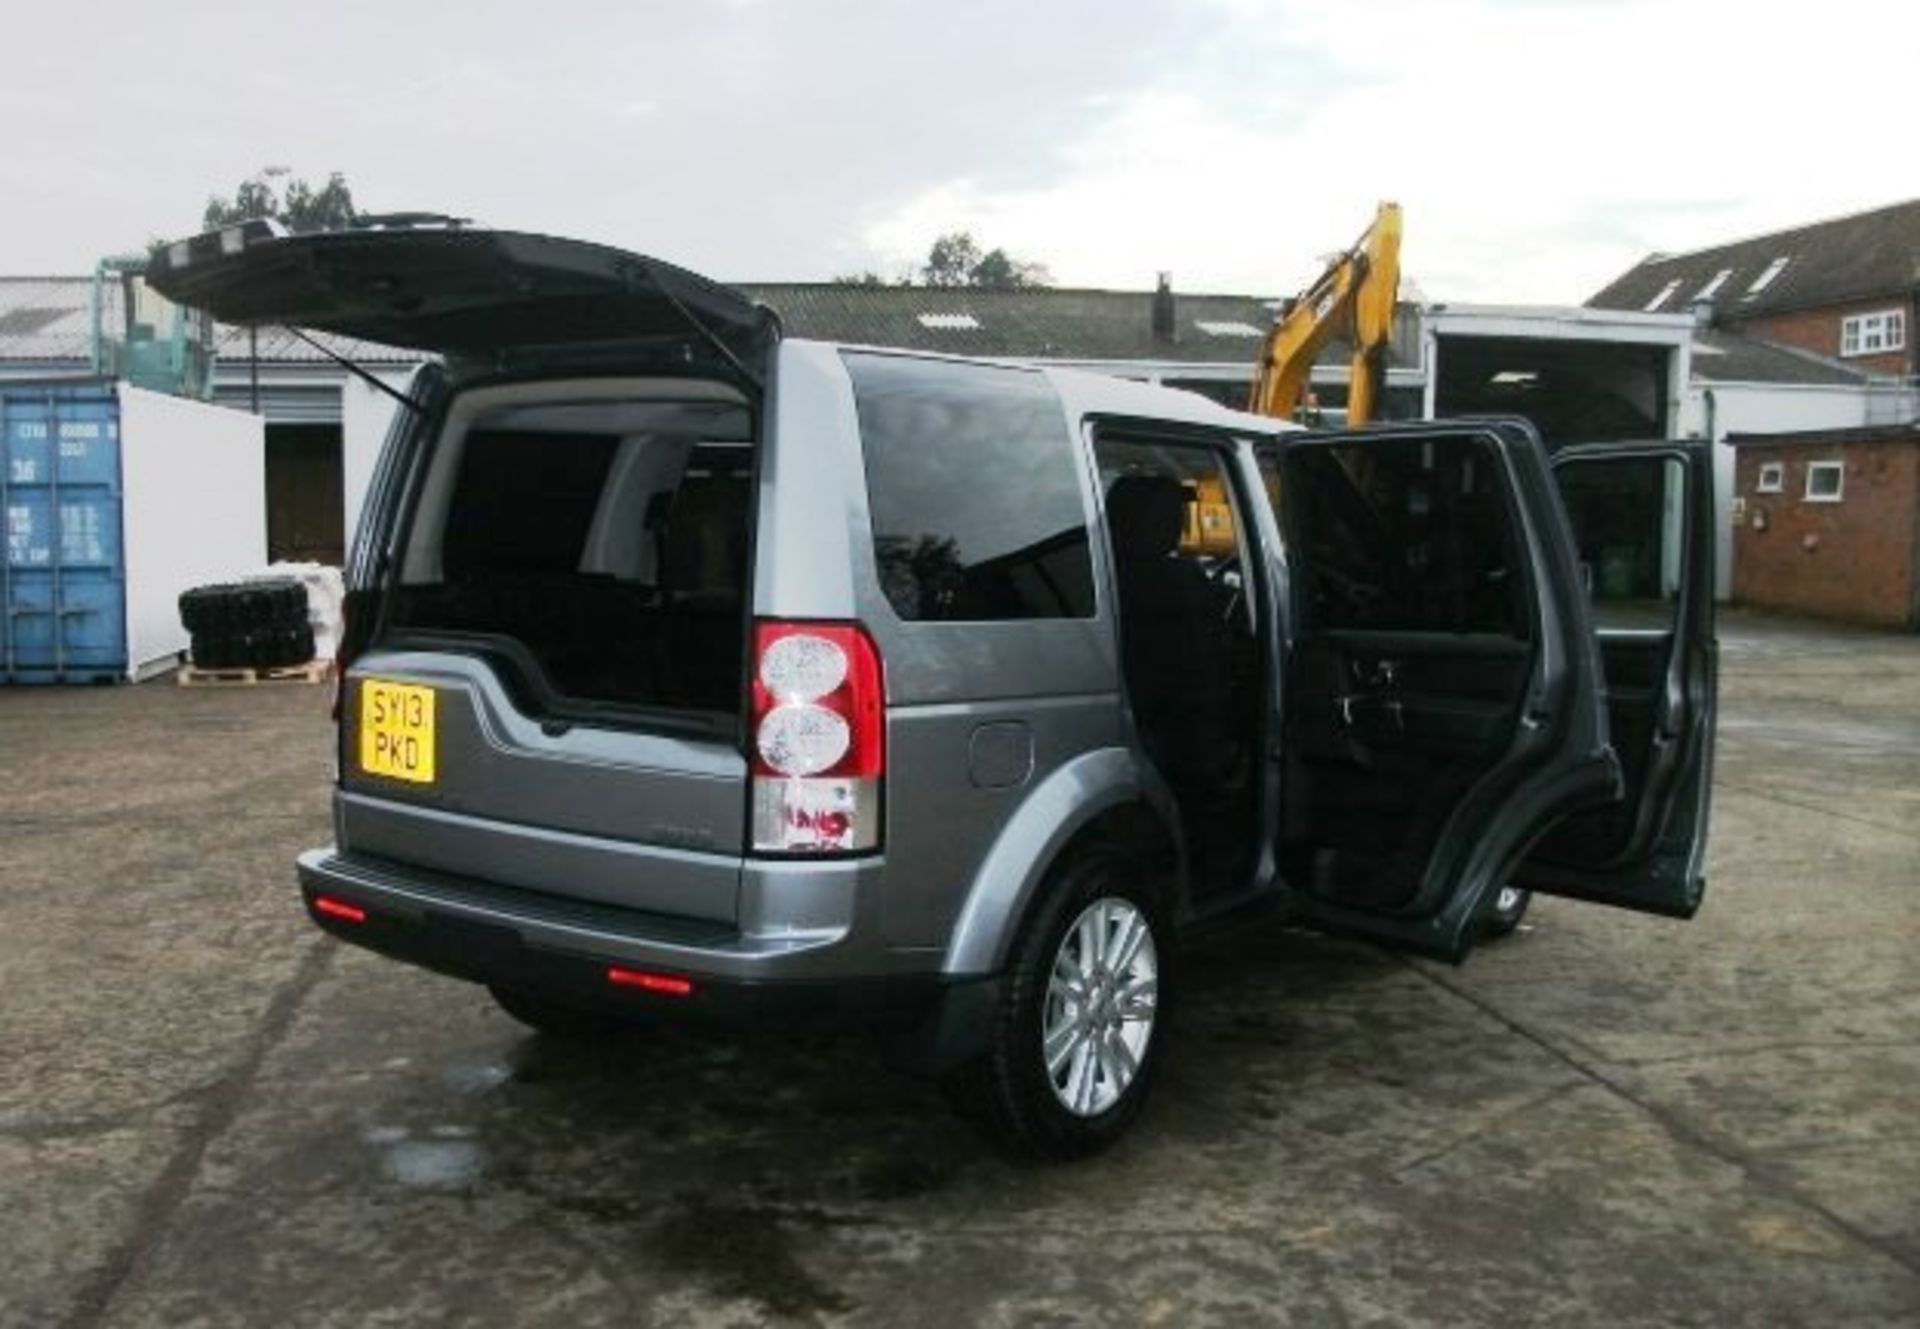 LAND ROVER DISCOVERY SDV6 AUTO 255 - 2993cc
Body: 4 Dr 4x4
Color: Grey
First Reg: 26/04/2013 - Image 11 of 29